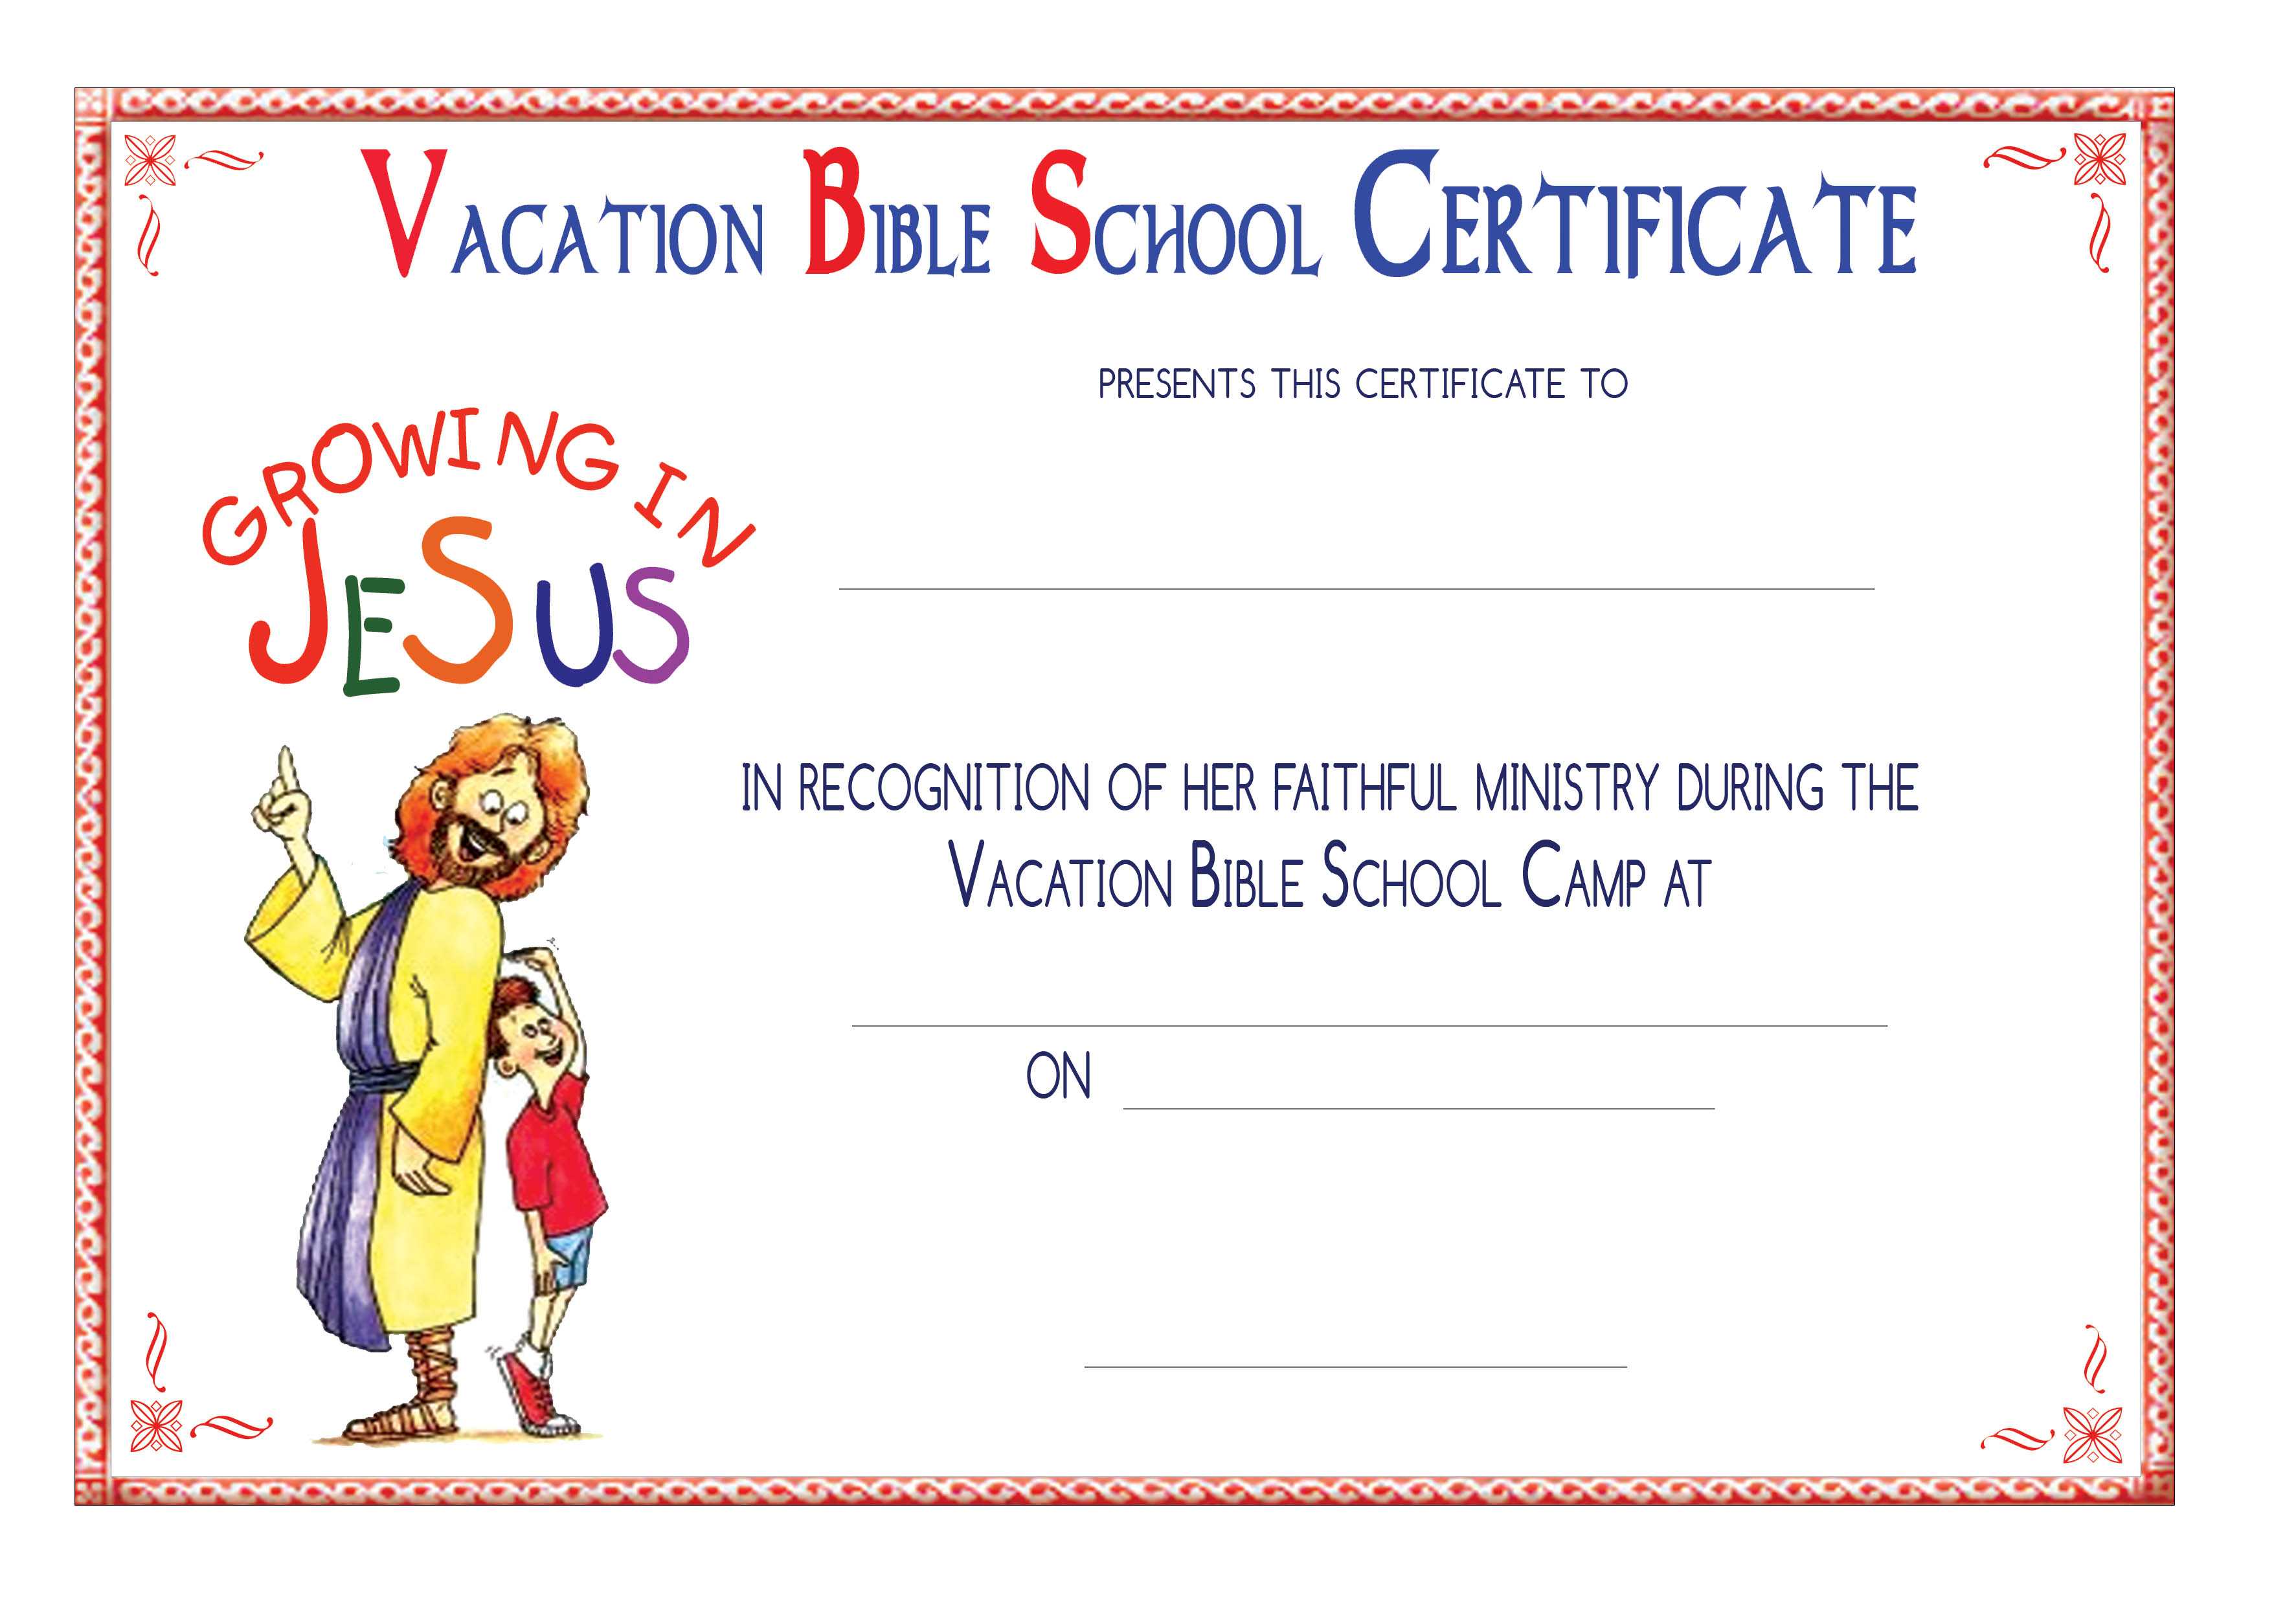 Certificate Templates: 5 Best Images Of Printable Vbs Intended For School Certificate Templates Free